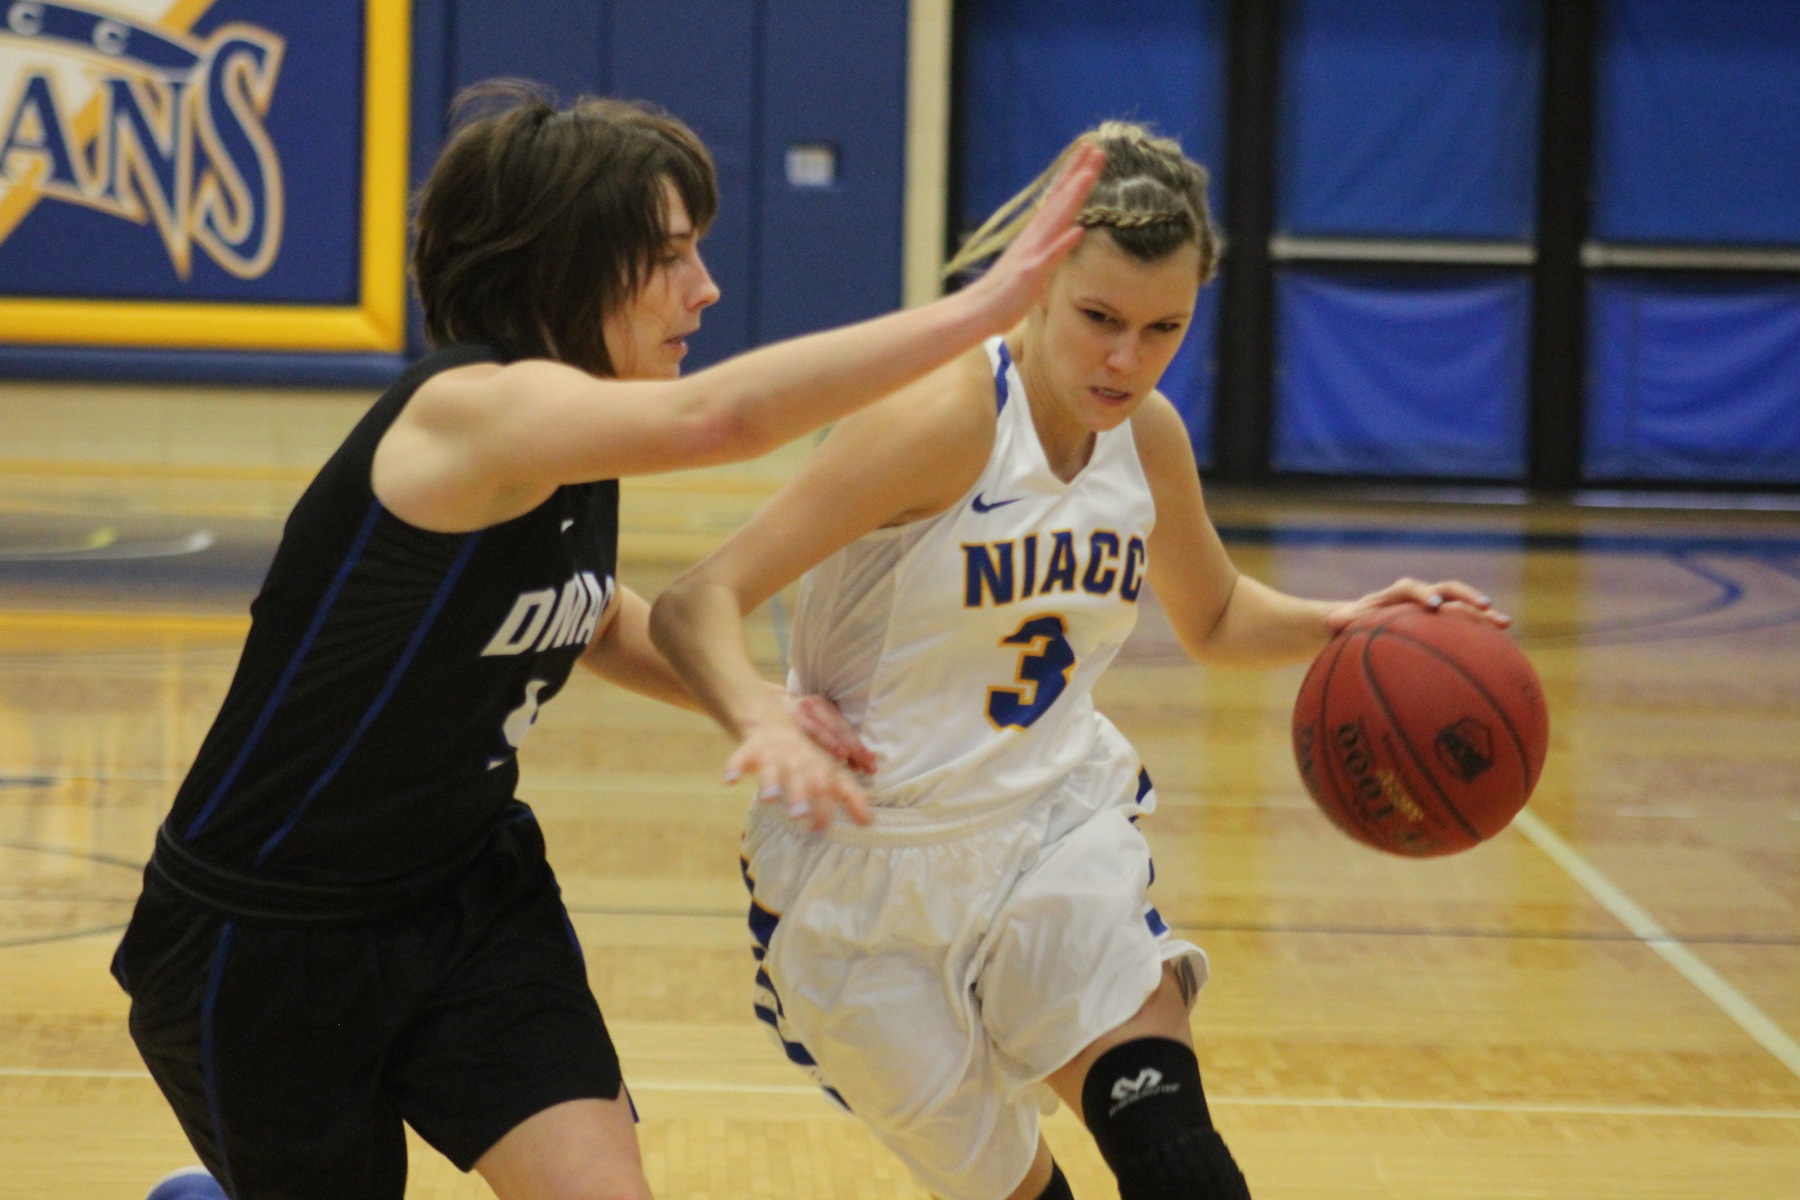 NIACC's Taylor Laabs drives to the basket in Saturday's game against DMACC.